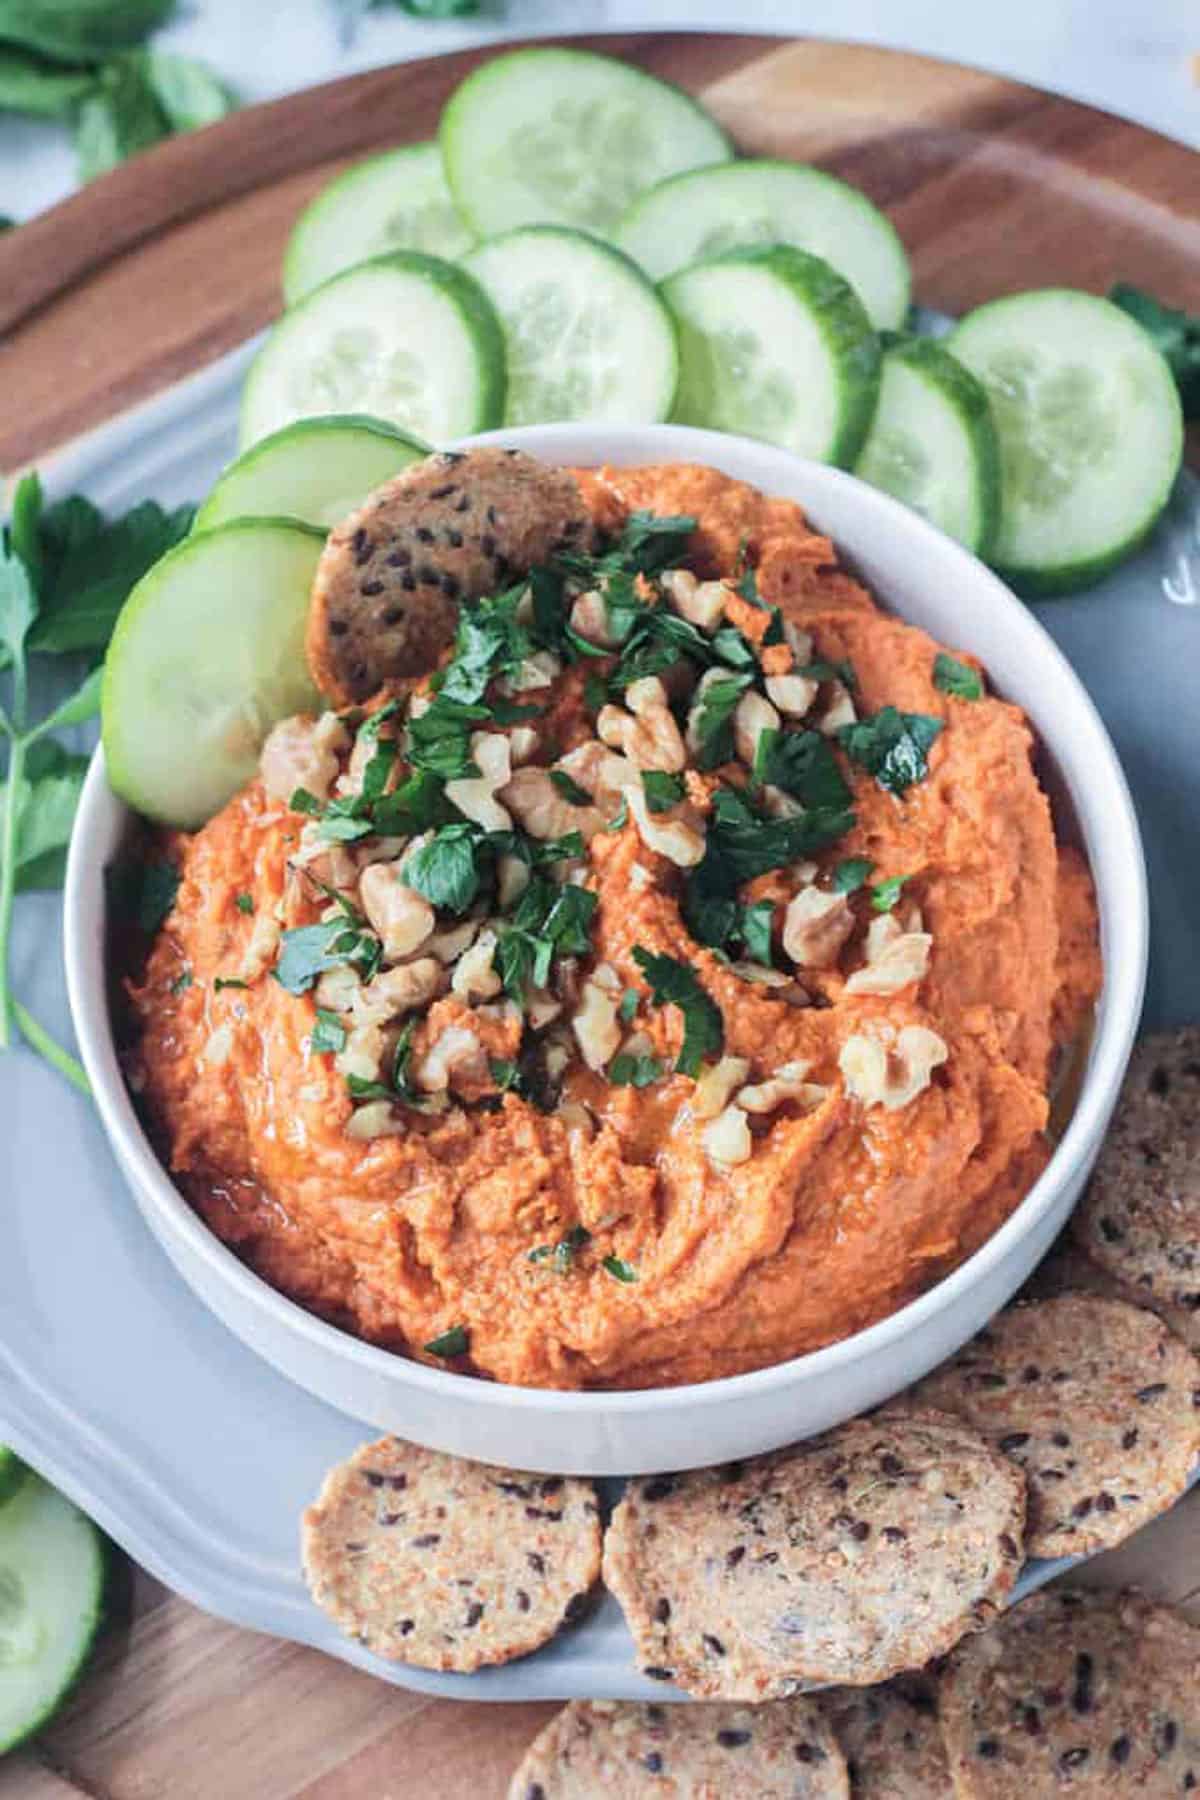 A cracker and 2 cucumber slices in a bowl of carrot hummus.